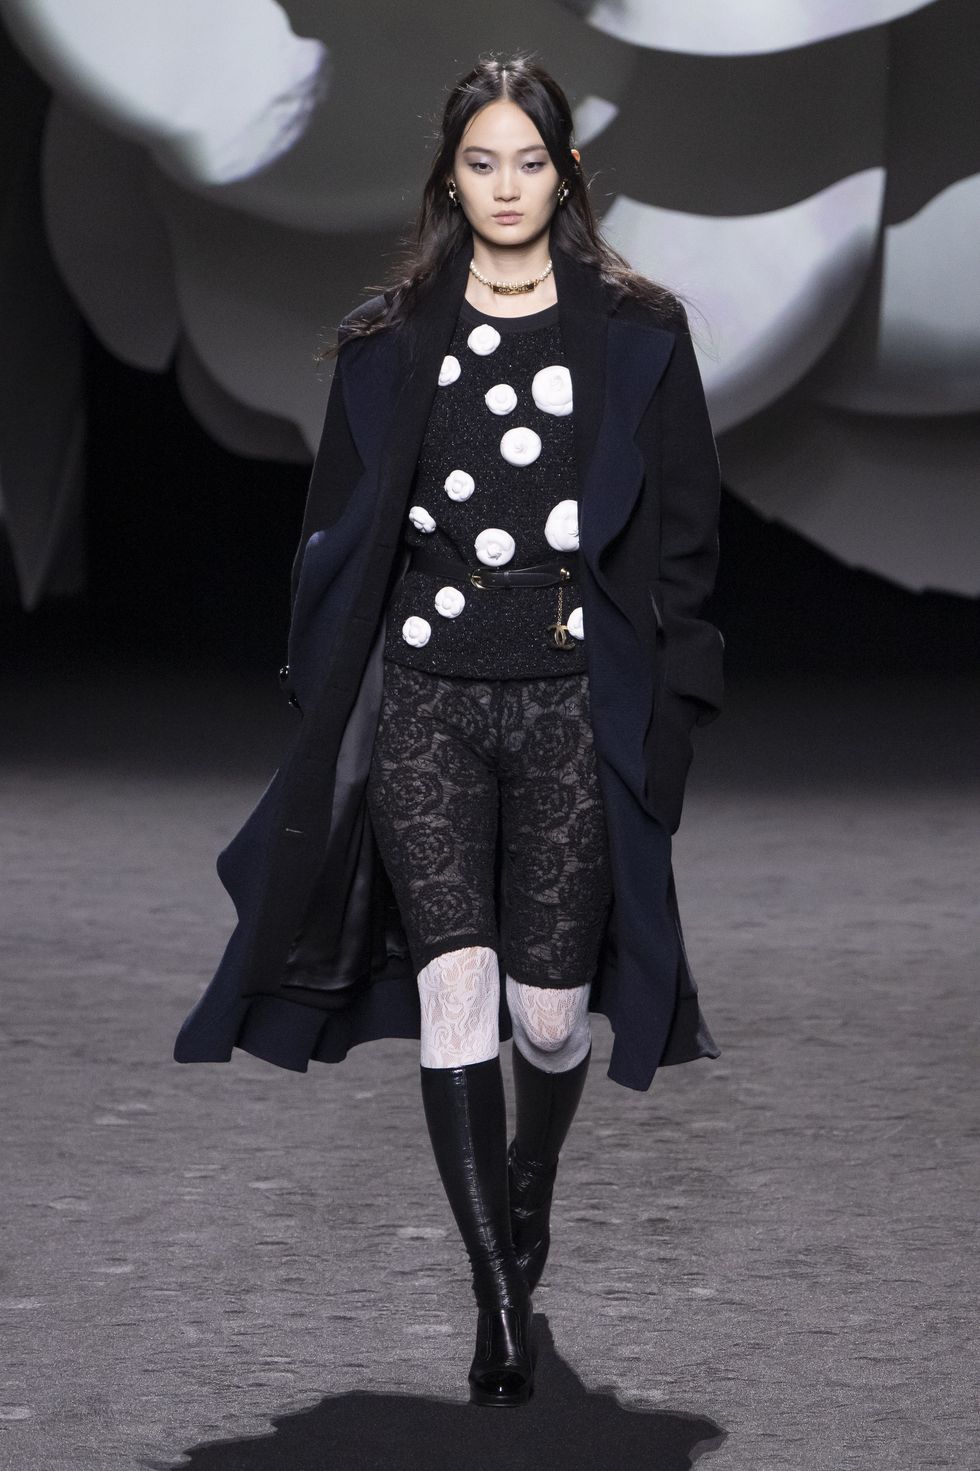 paris, france march 07 a model walks the runway during the chanel ready to wear fallwinter 2023 2024 fashion show as part of the paris fashion week on march 7, 2023 in paris, france photo by victor virgilegamma rapho via getty images